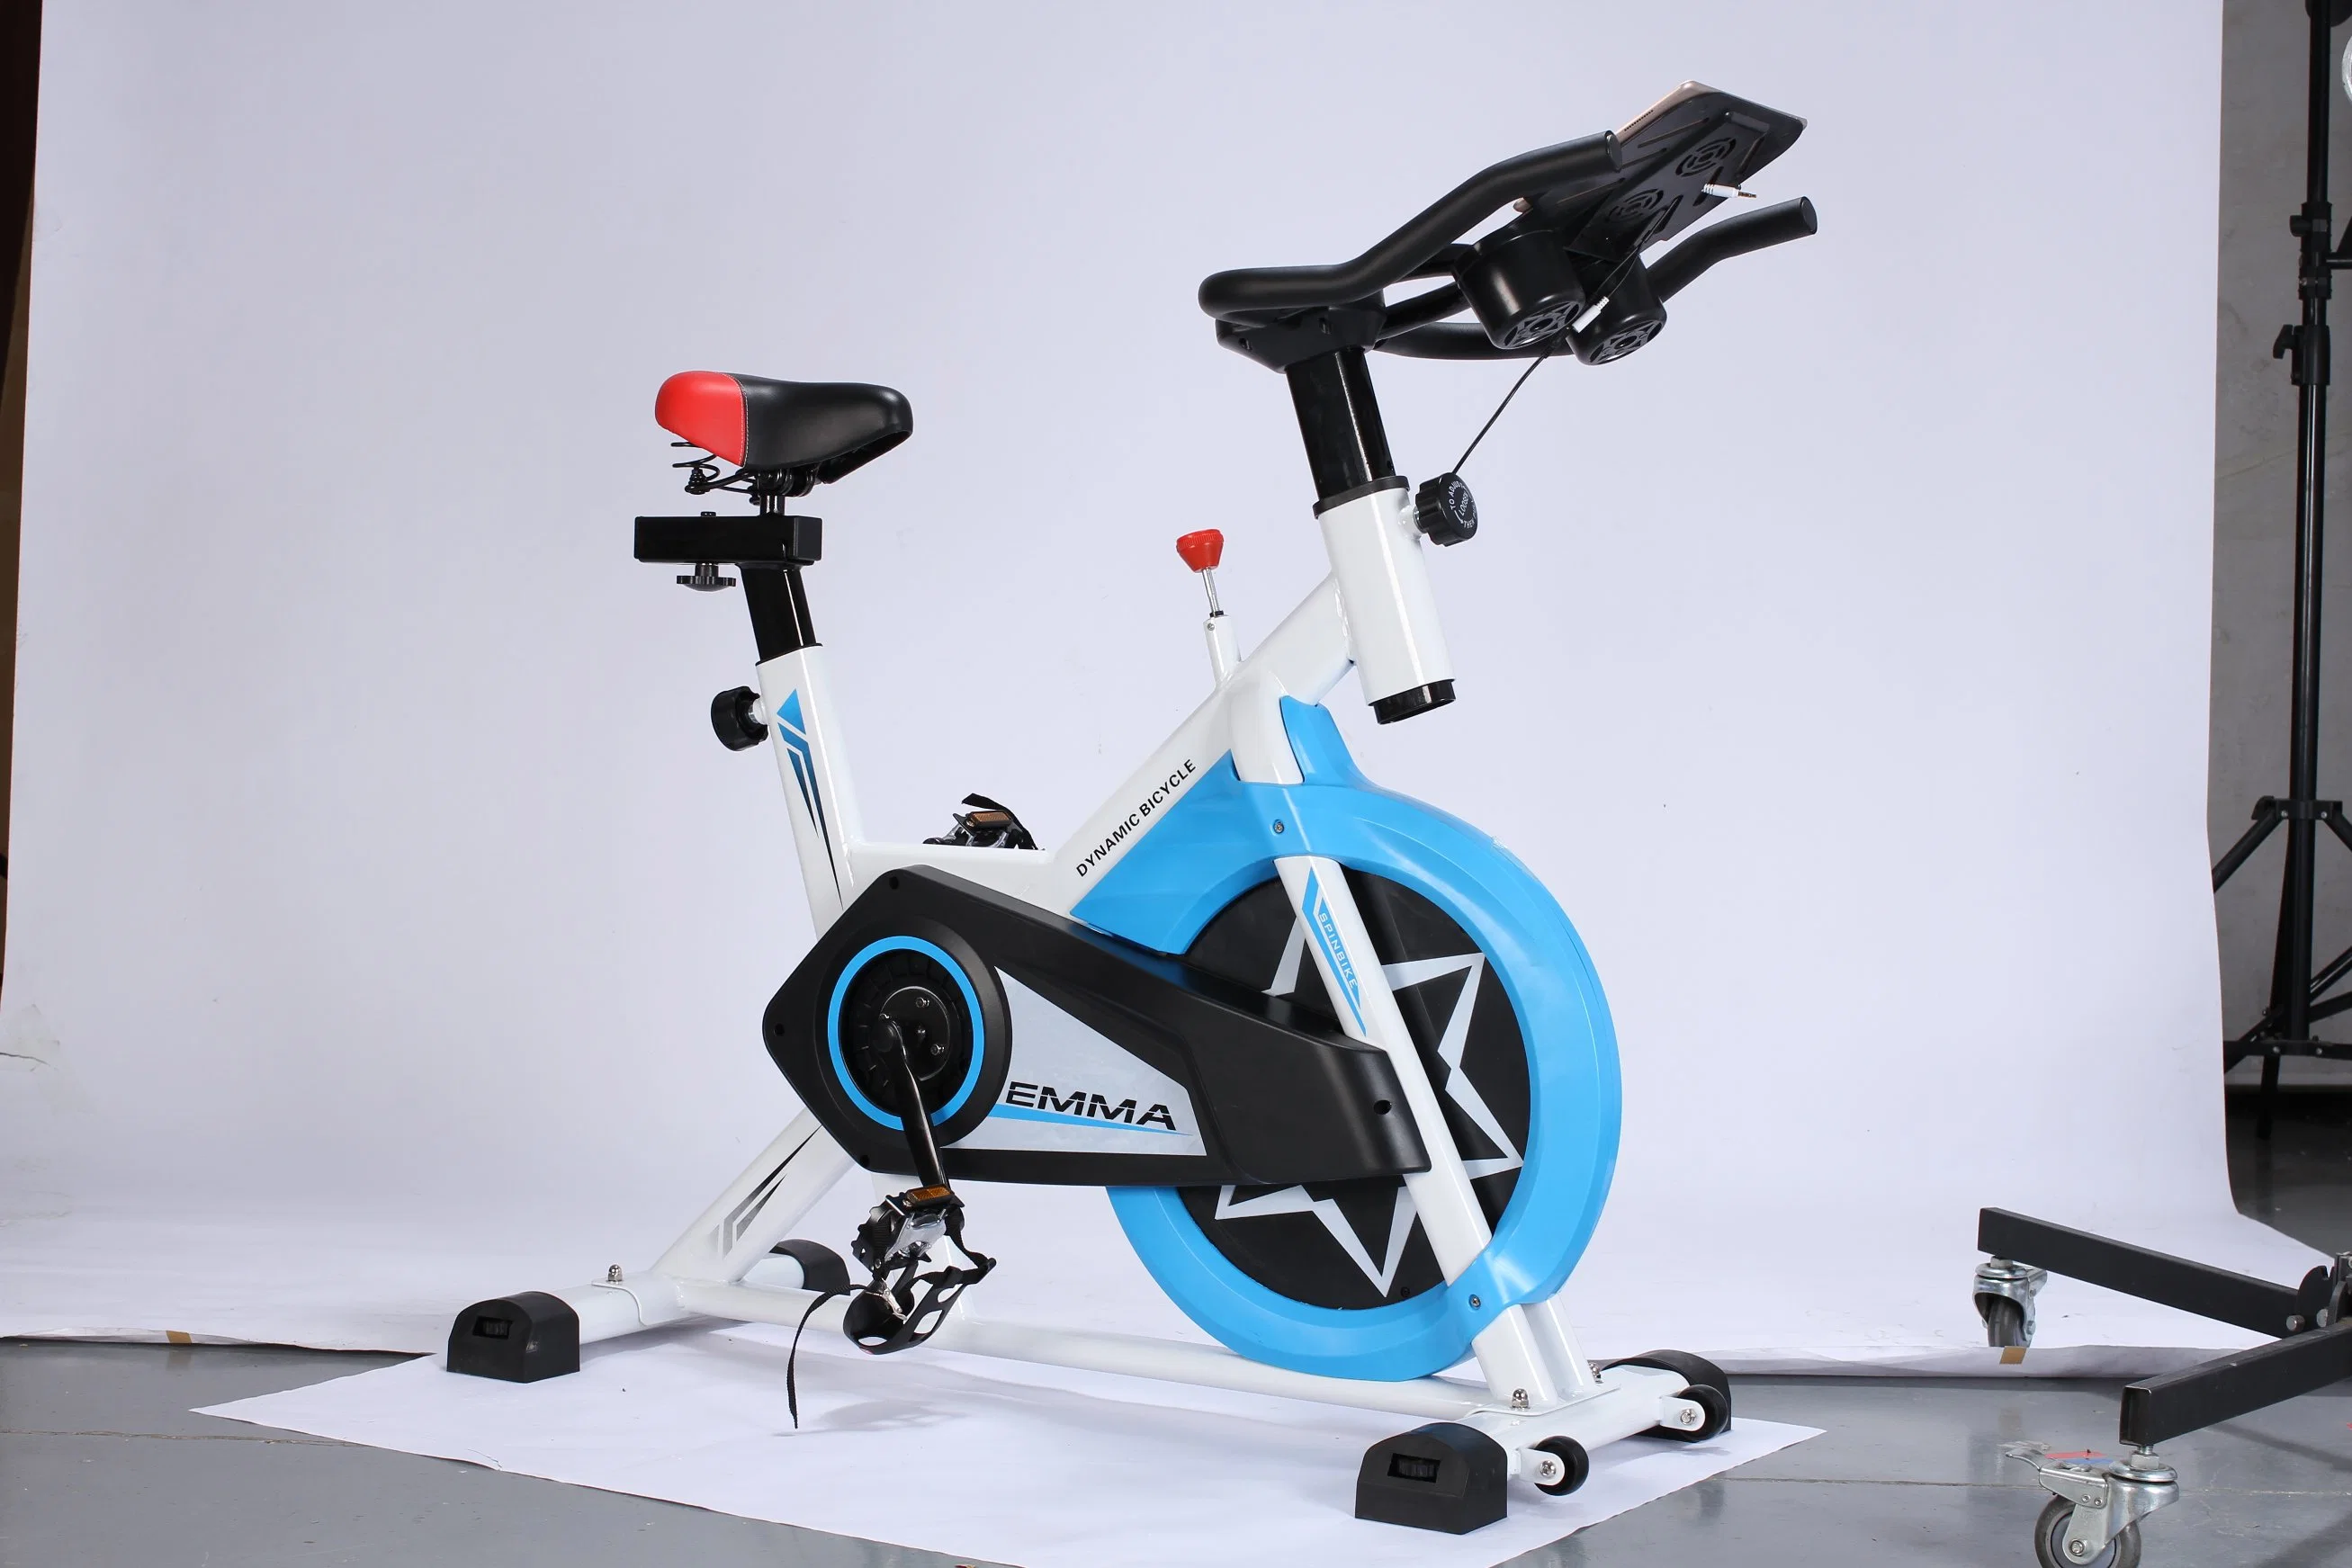 Emma Indoor Cycling Bike Stationary Exercise Bicycle Fitness Equipment for Home Gym Workout